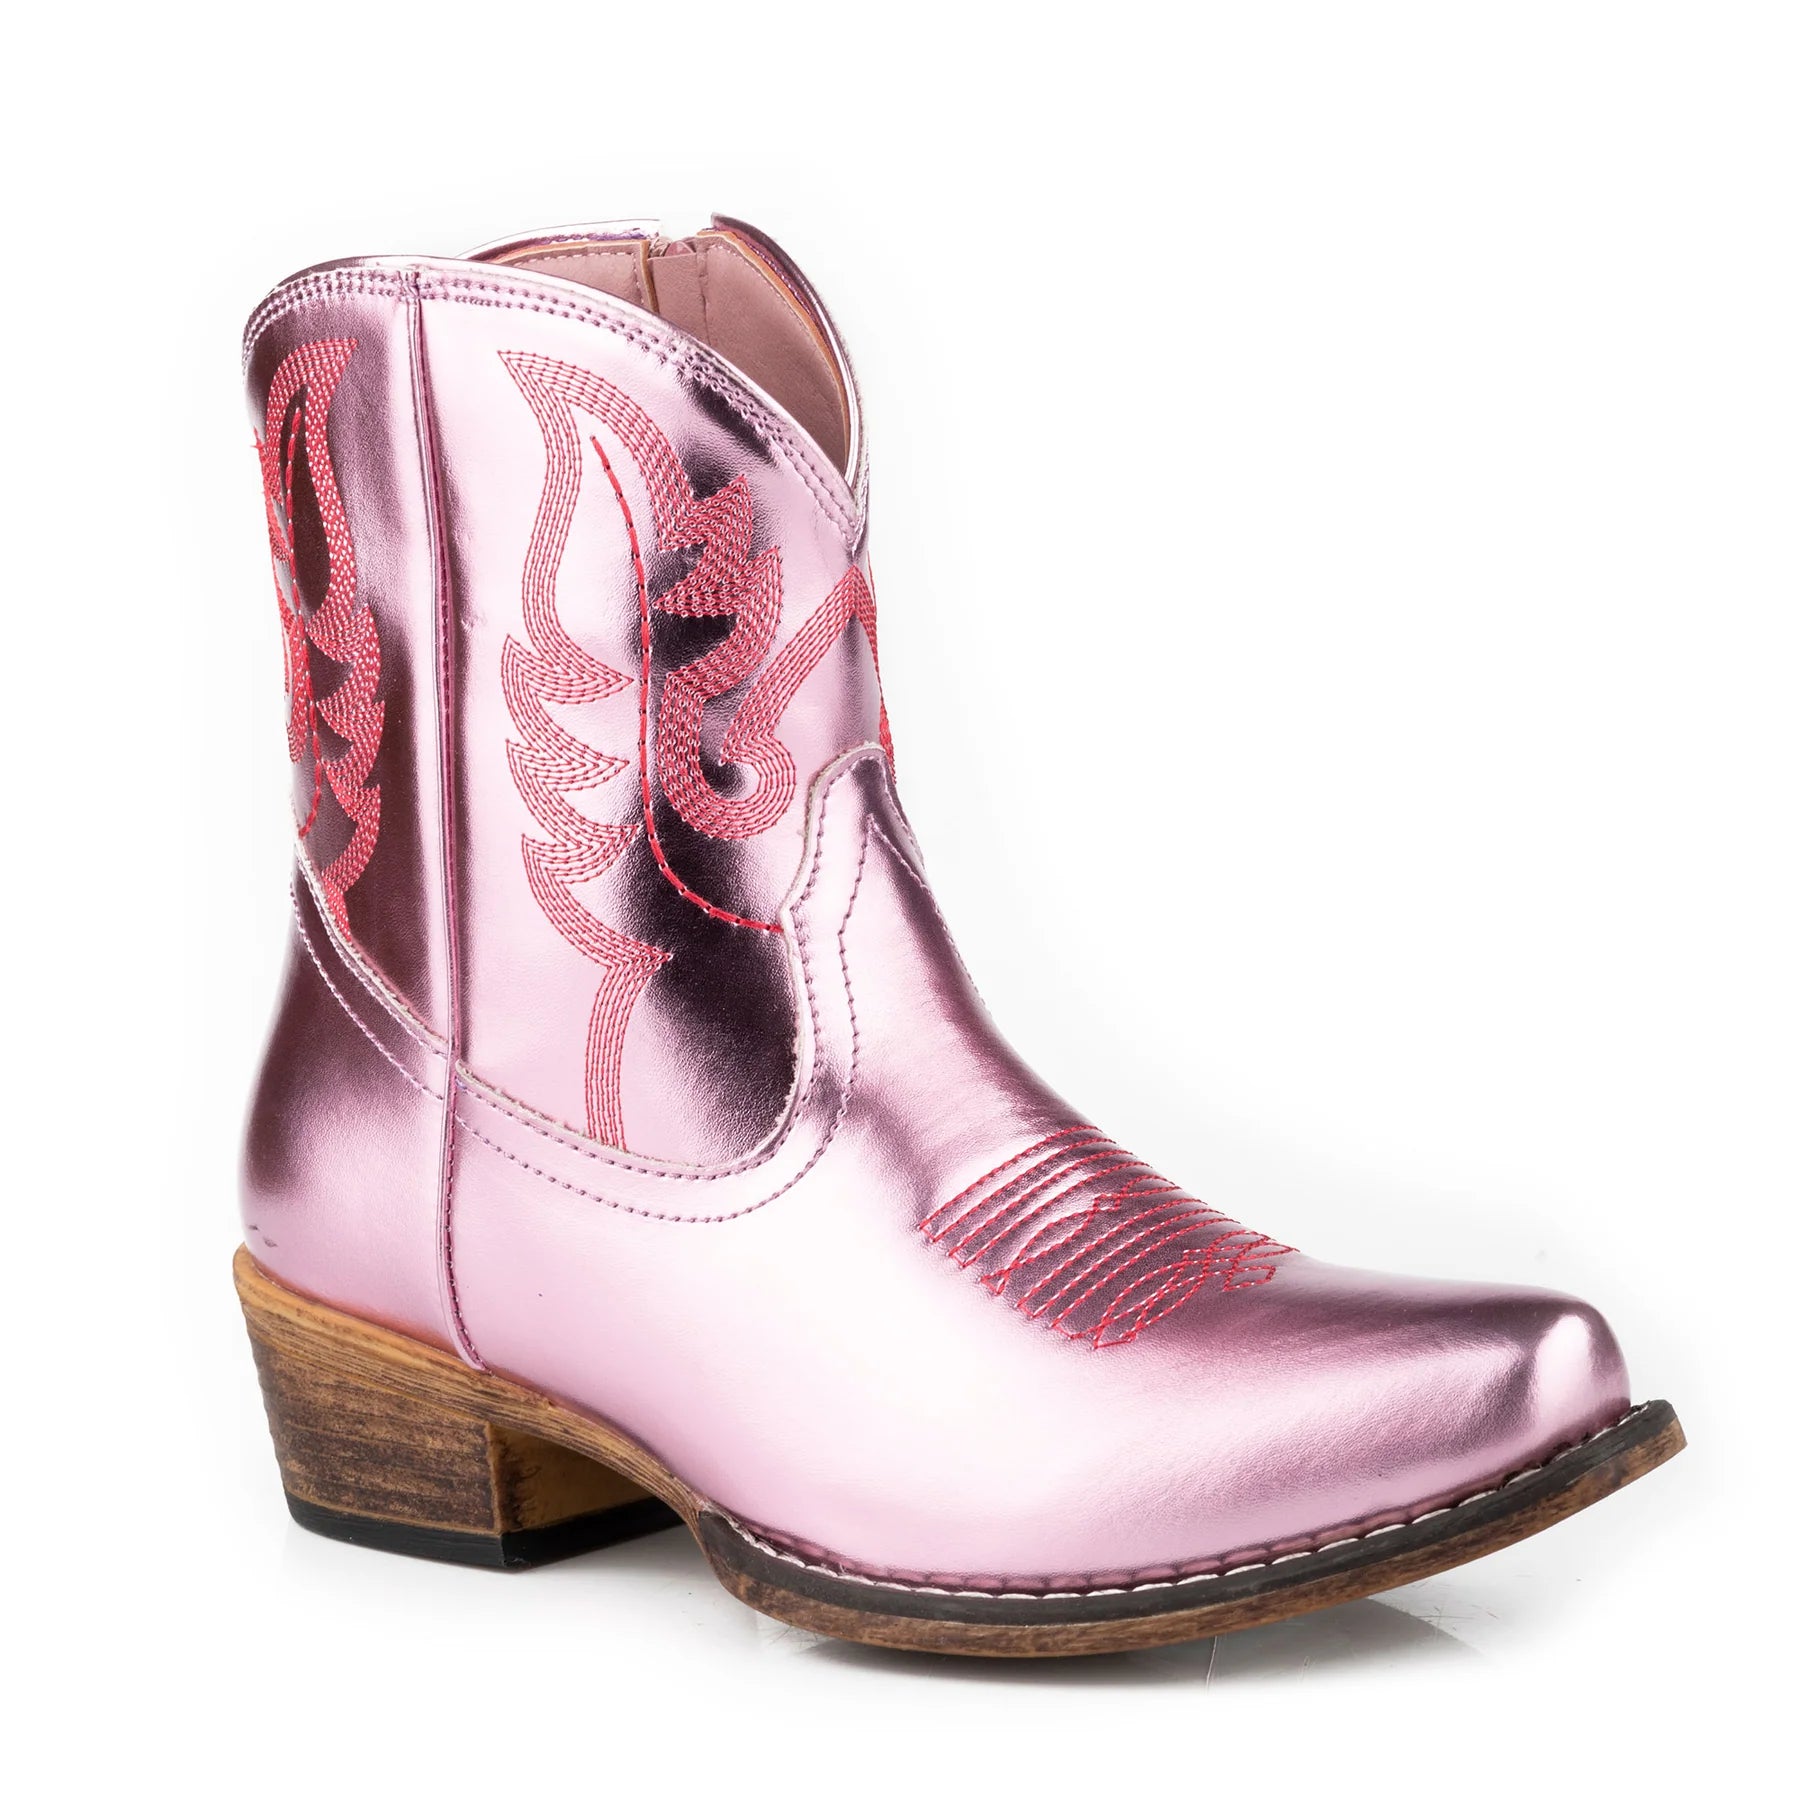 Roper Wmns Shay Pink Metallic - Mothers Day Sale